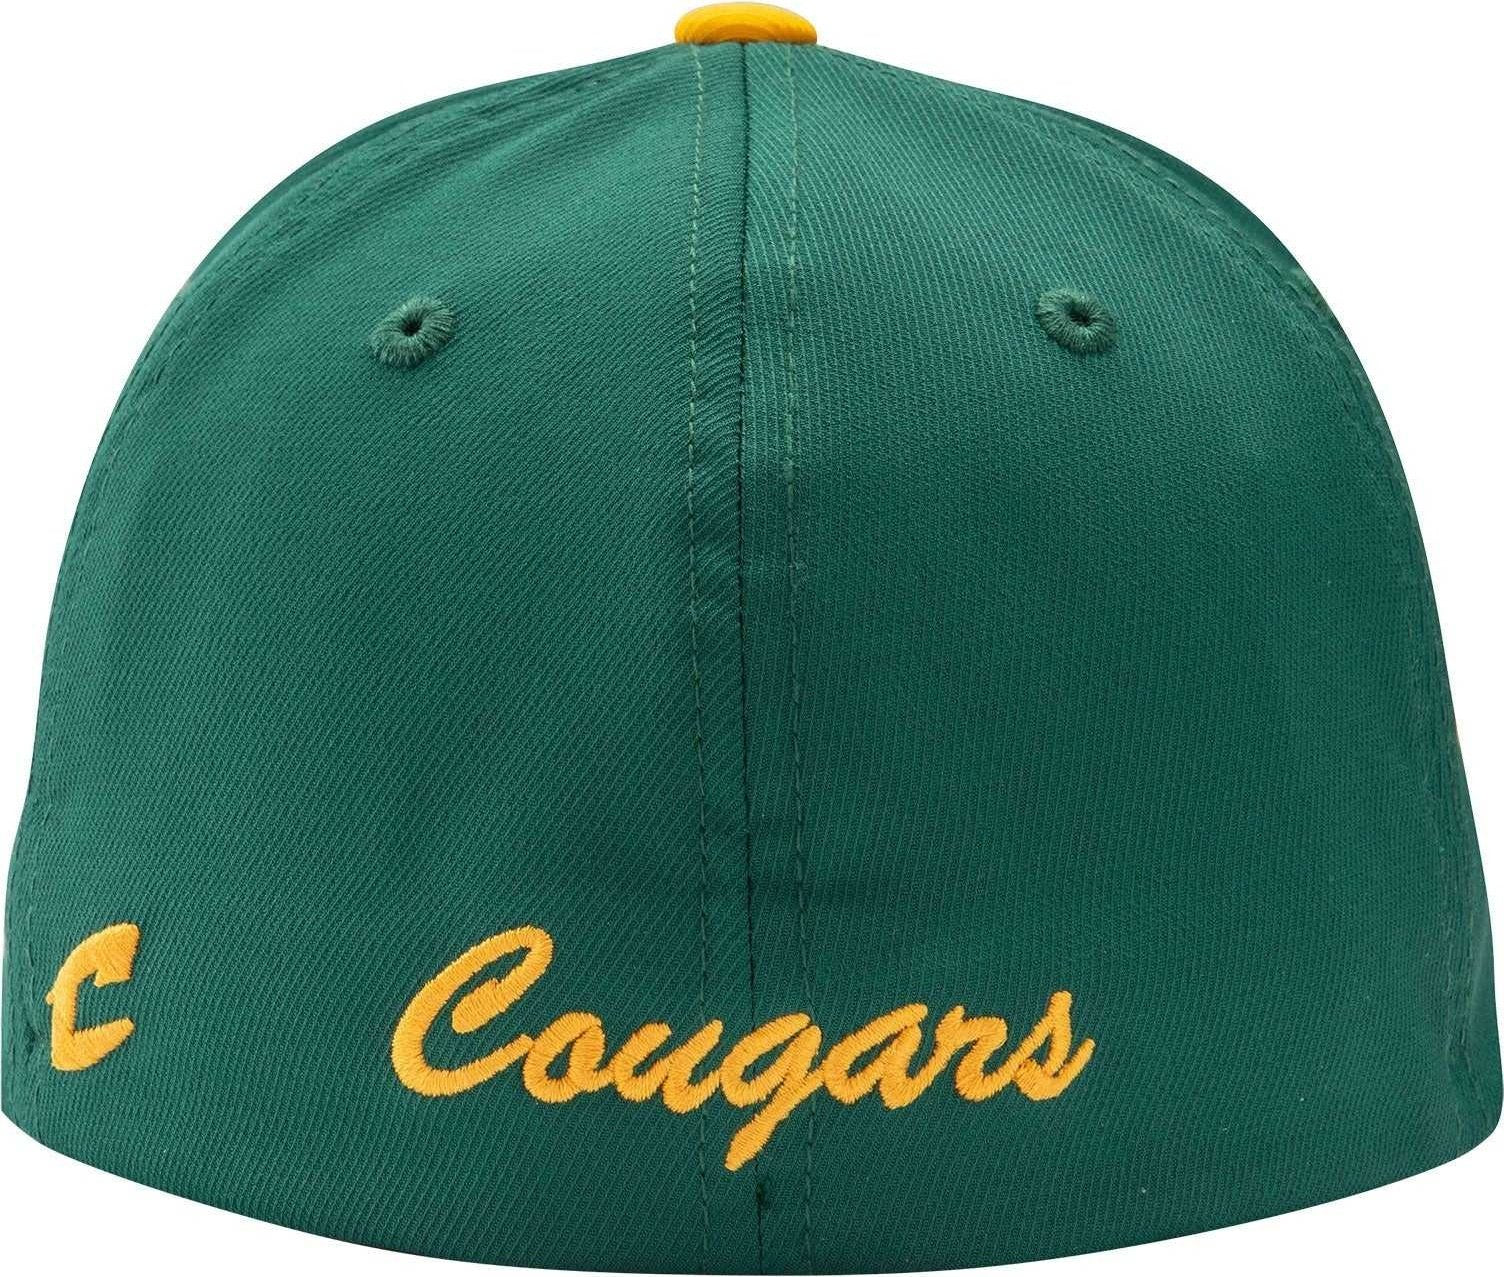 Oakland Athletics (A's) Youth MLB Licensed Replica Caps / All 30 Teams,  Official Major League Baseball Hat of Youth Little League and Youth Teams